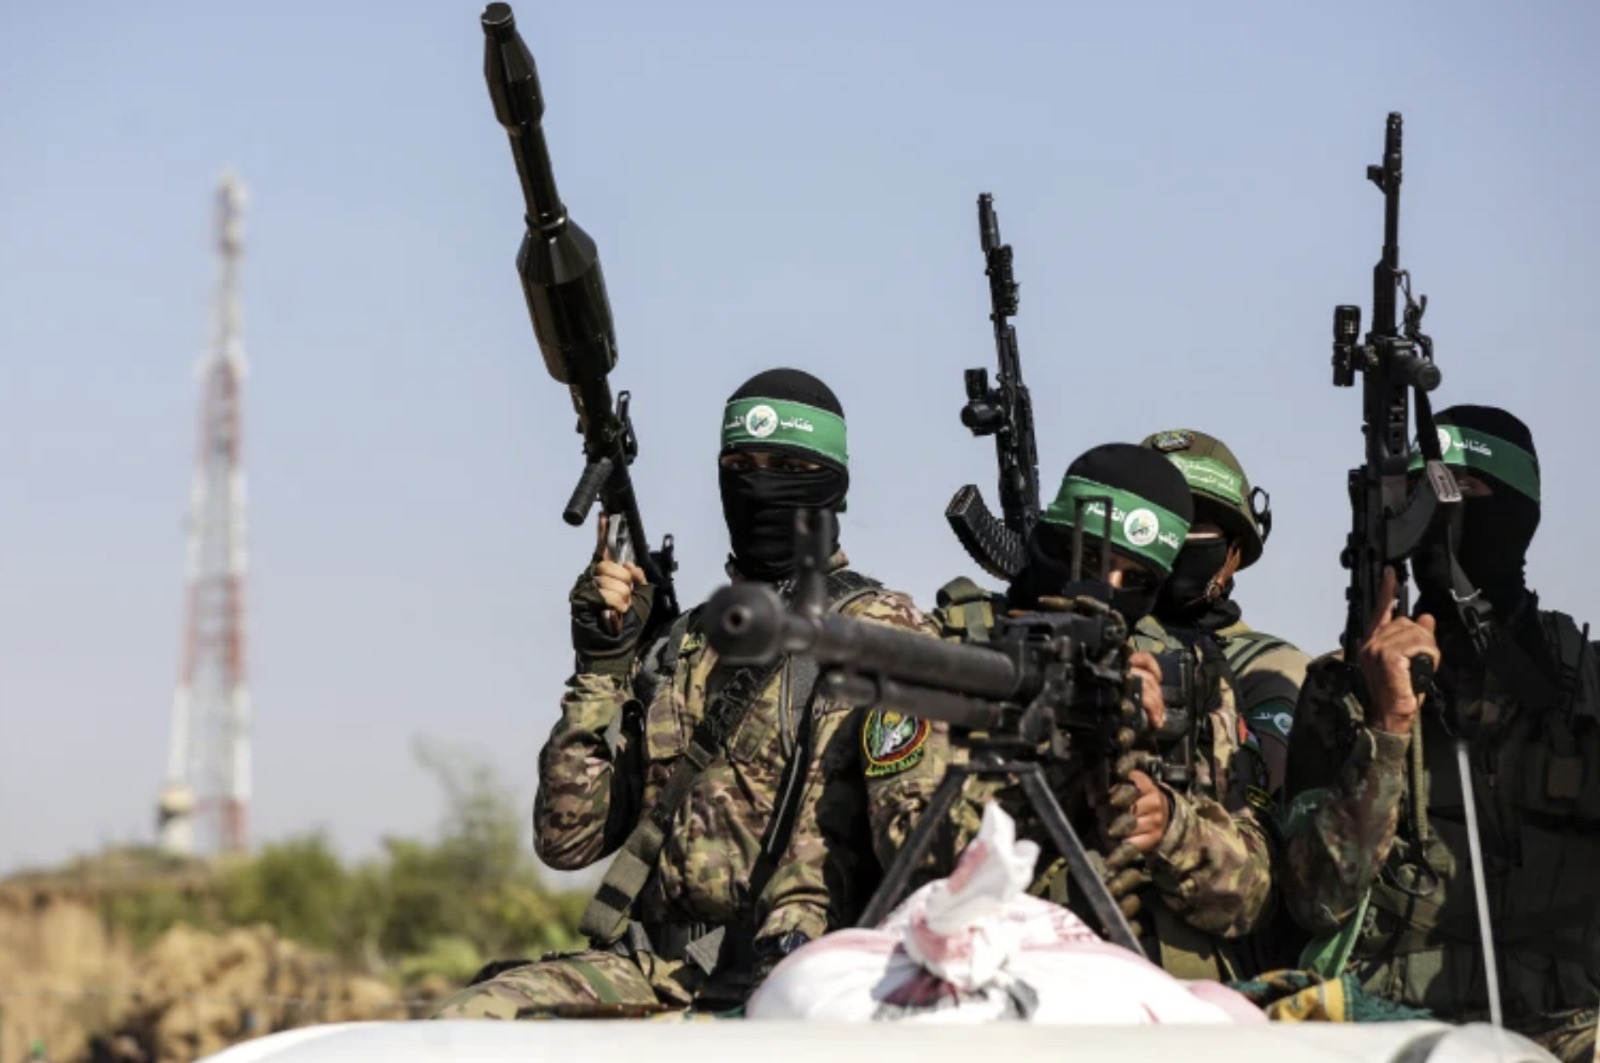 Hamas’ Global War What Do College Campuses Have to Do With It? By Howard Bloom